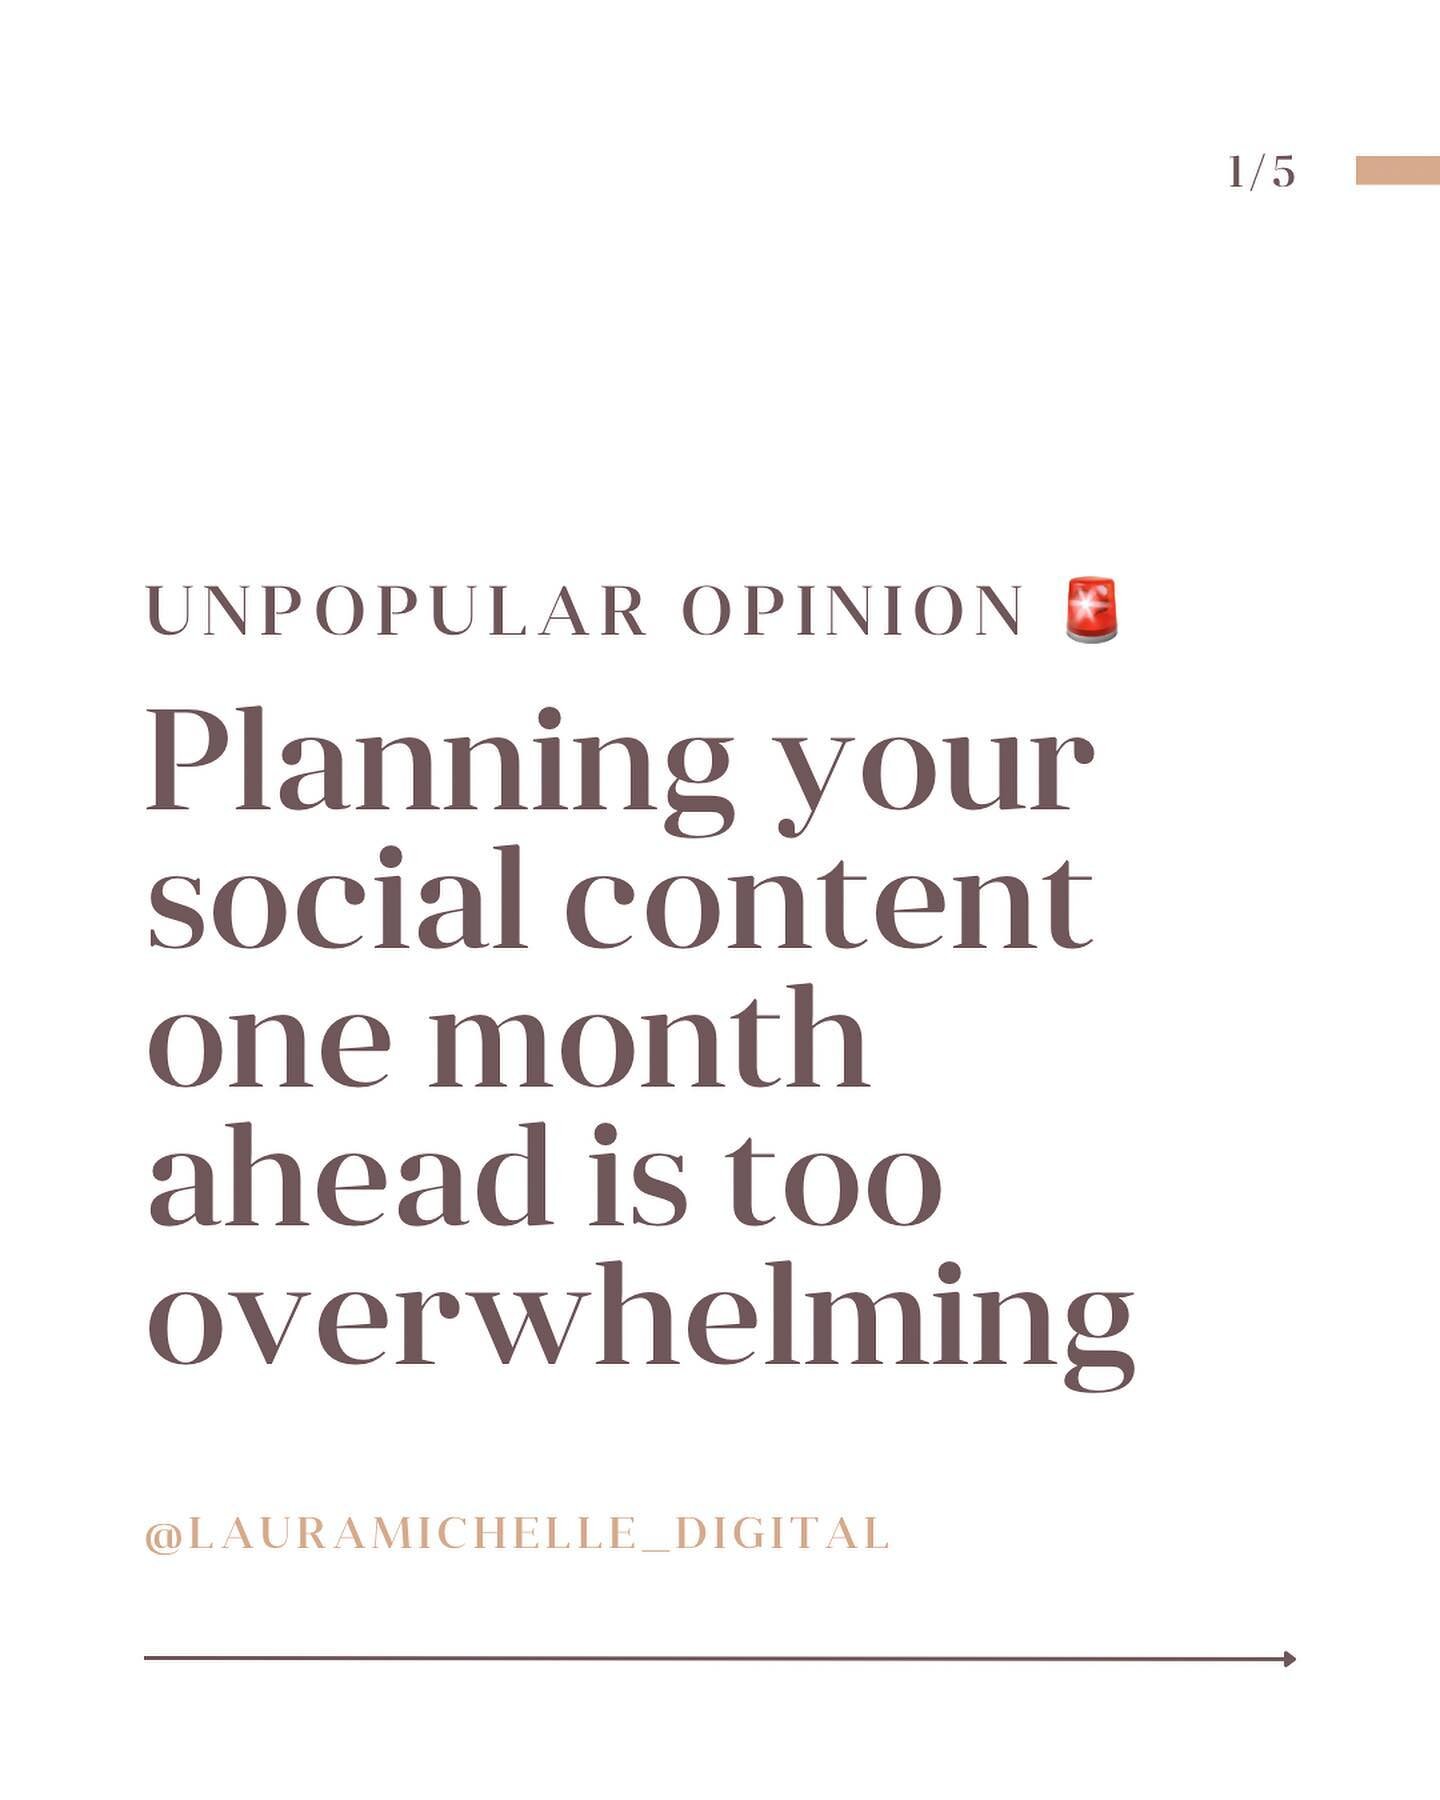 Unpopular Opinion 👇
Monthly content planning is overwhelming for small business owners because life changes too quickly! 😅Planning just one or two weeks ahead is much simpler and can be a game-changer! 

💡 Join my FREE Power Hour and learn how to 